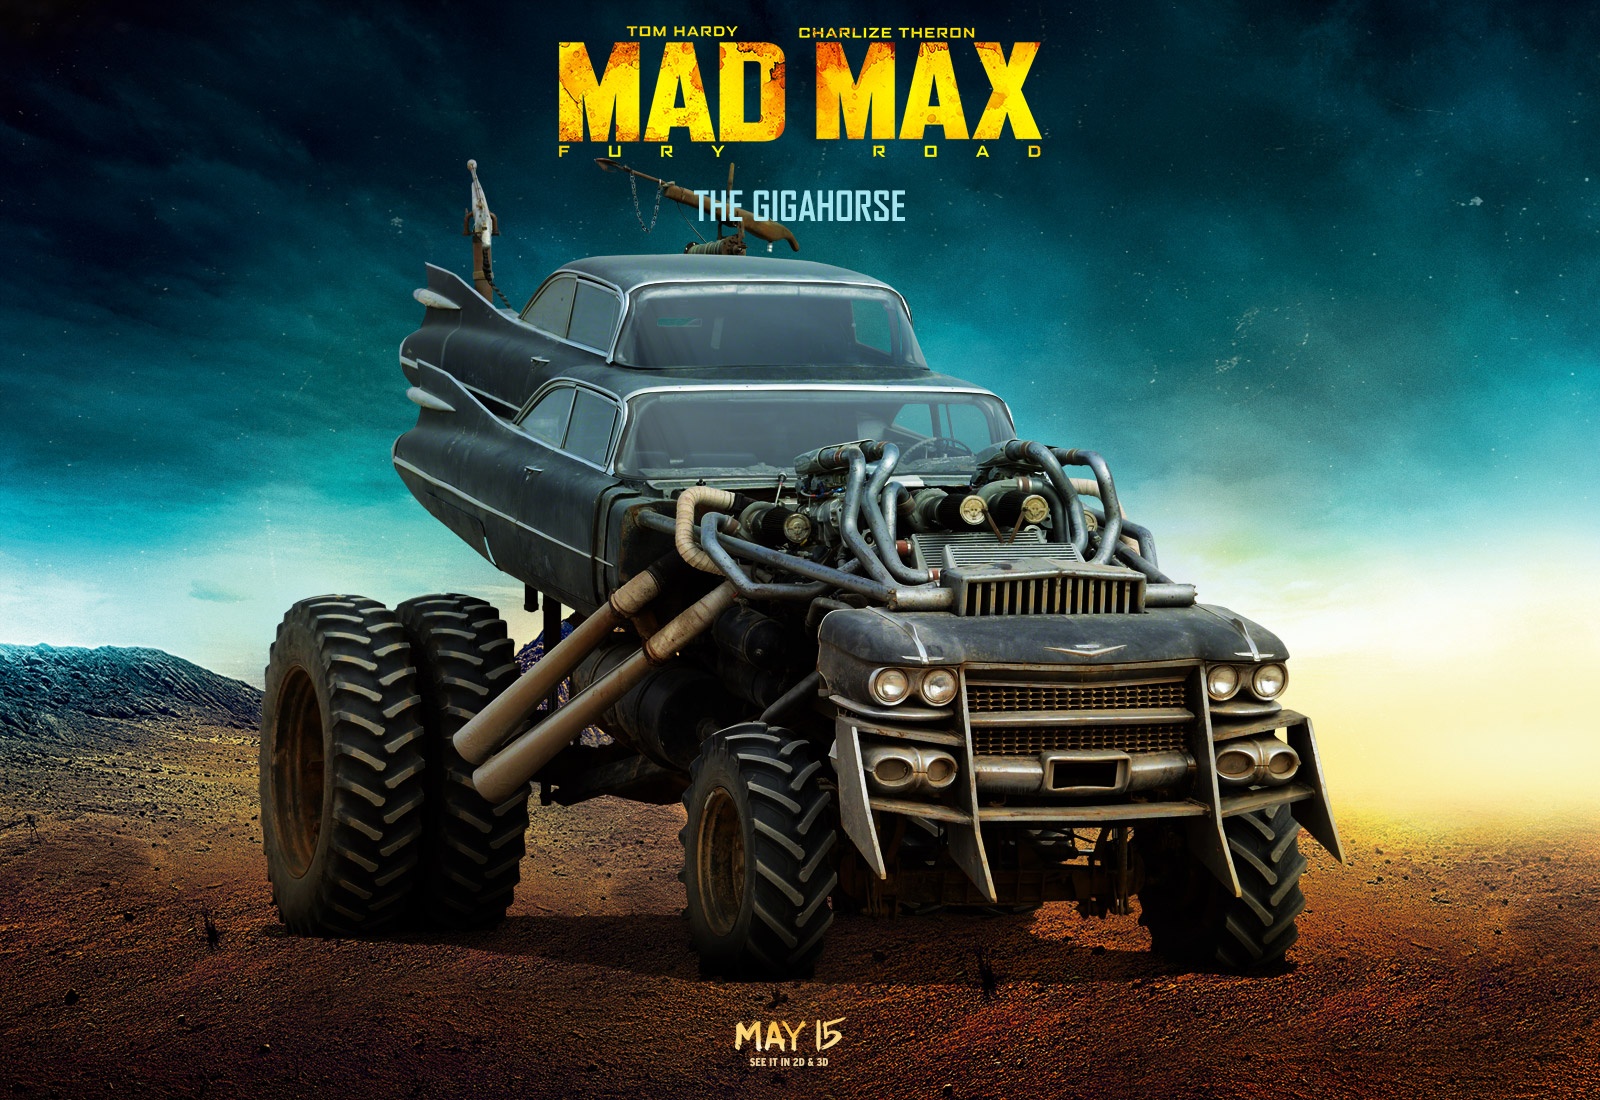 Mad Max - The Gigahorse